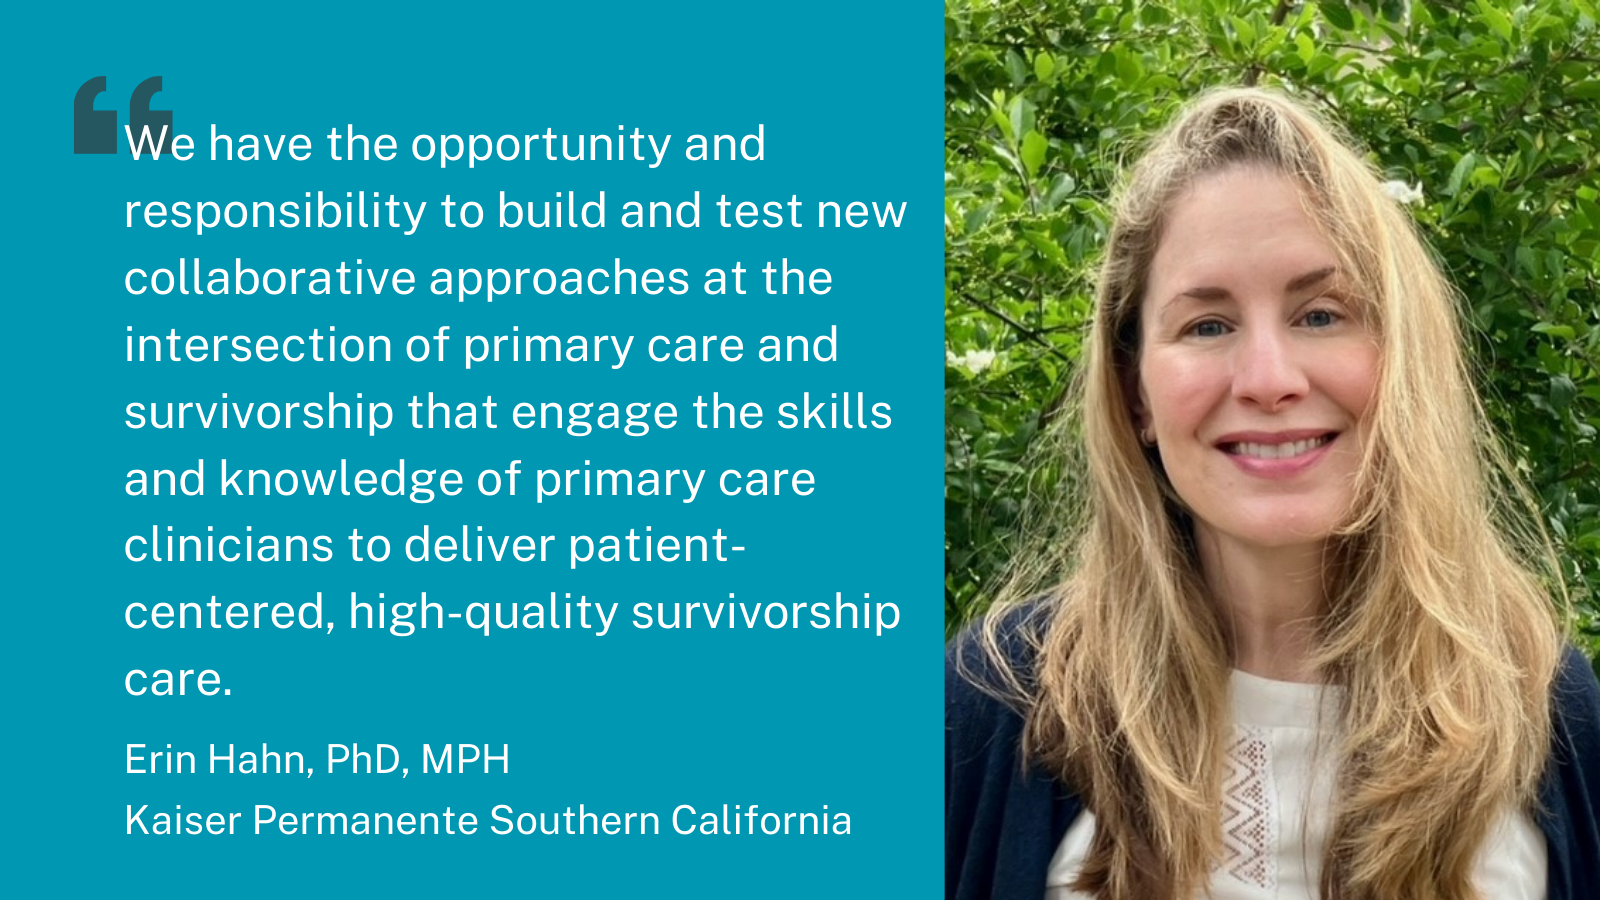 Quote 4. We have the opportunity and responsibility to build and test new collaborative approaches at the intersection of primary care and survivorship that engage the skills and knowledge of primary care clinicians to deliver patient-centered high-quality survivorship care. Erin Hahn, PhD, MPH, Kaiser Permanente Southern California.